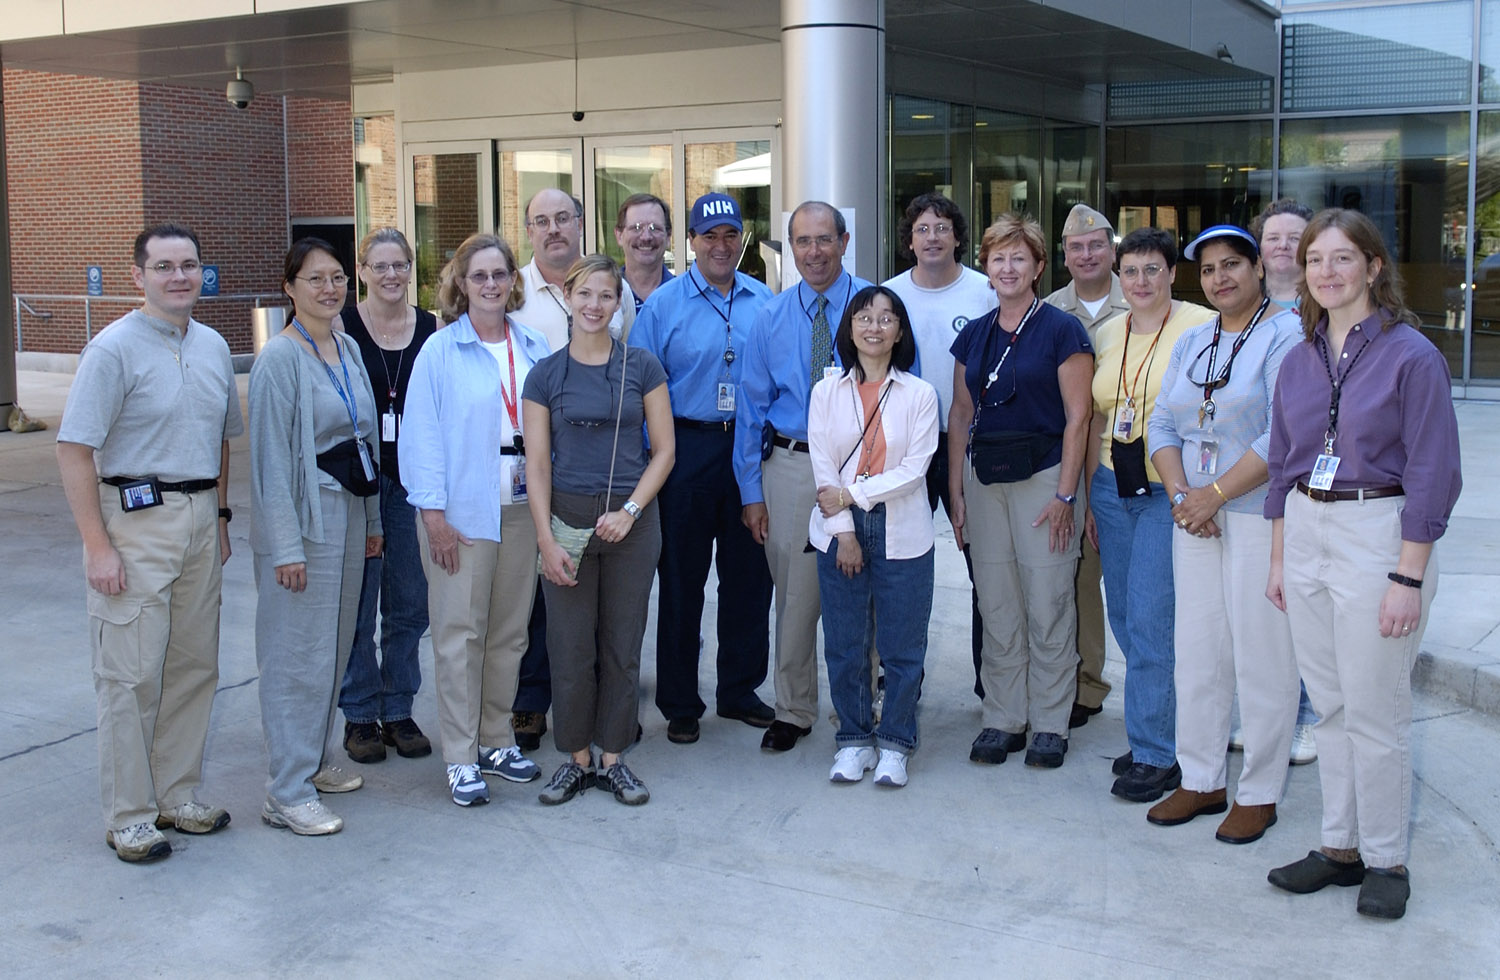 NIH director Dr. Elias Zerhouni (center in ballcap) and CC director Dr. John Gallin (on the director?s left) meet with NIH volunteers who were deployed Sept. 4. They include (from l) Mark Ritter, Maryland Pao, Melanie Bacon, Jean Murphy, Mike Polis, Amy Garner-O?Brien, Jim Shelhamer, Alice Pao, James Gibbs, Deb Gardner, Bob Danner, Mary Sparks, Sashi Ravindran, Grace Kelly and Susan Hoover.